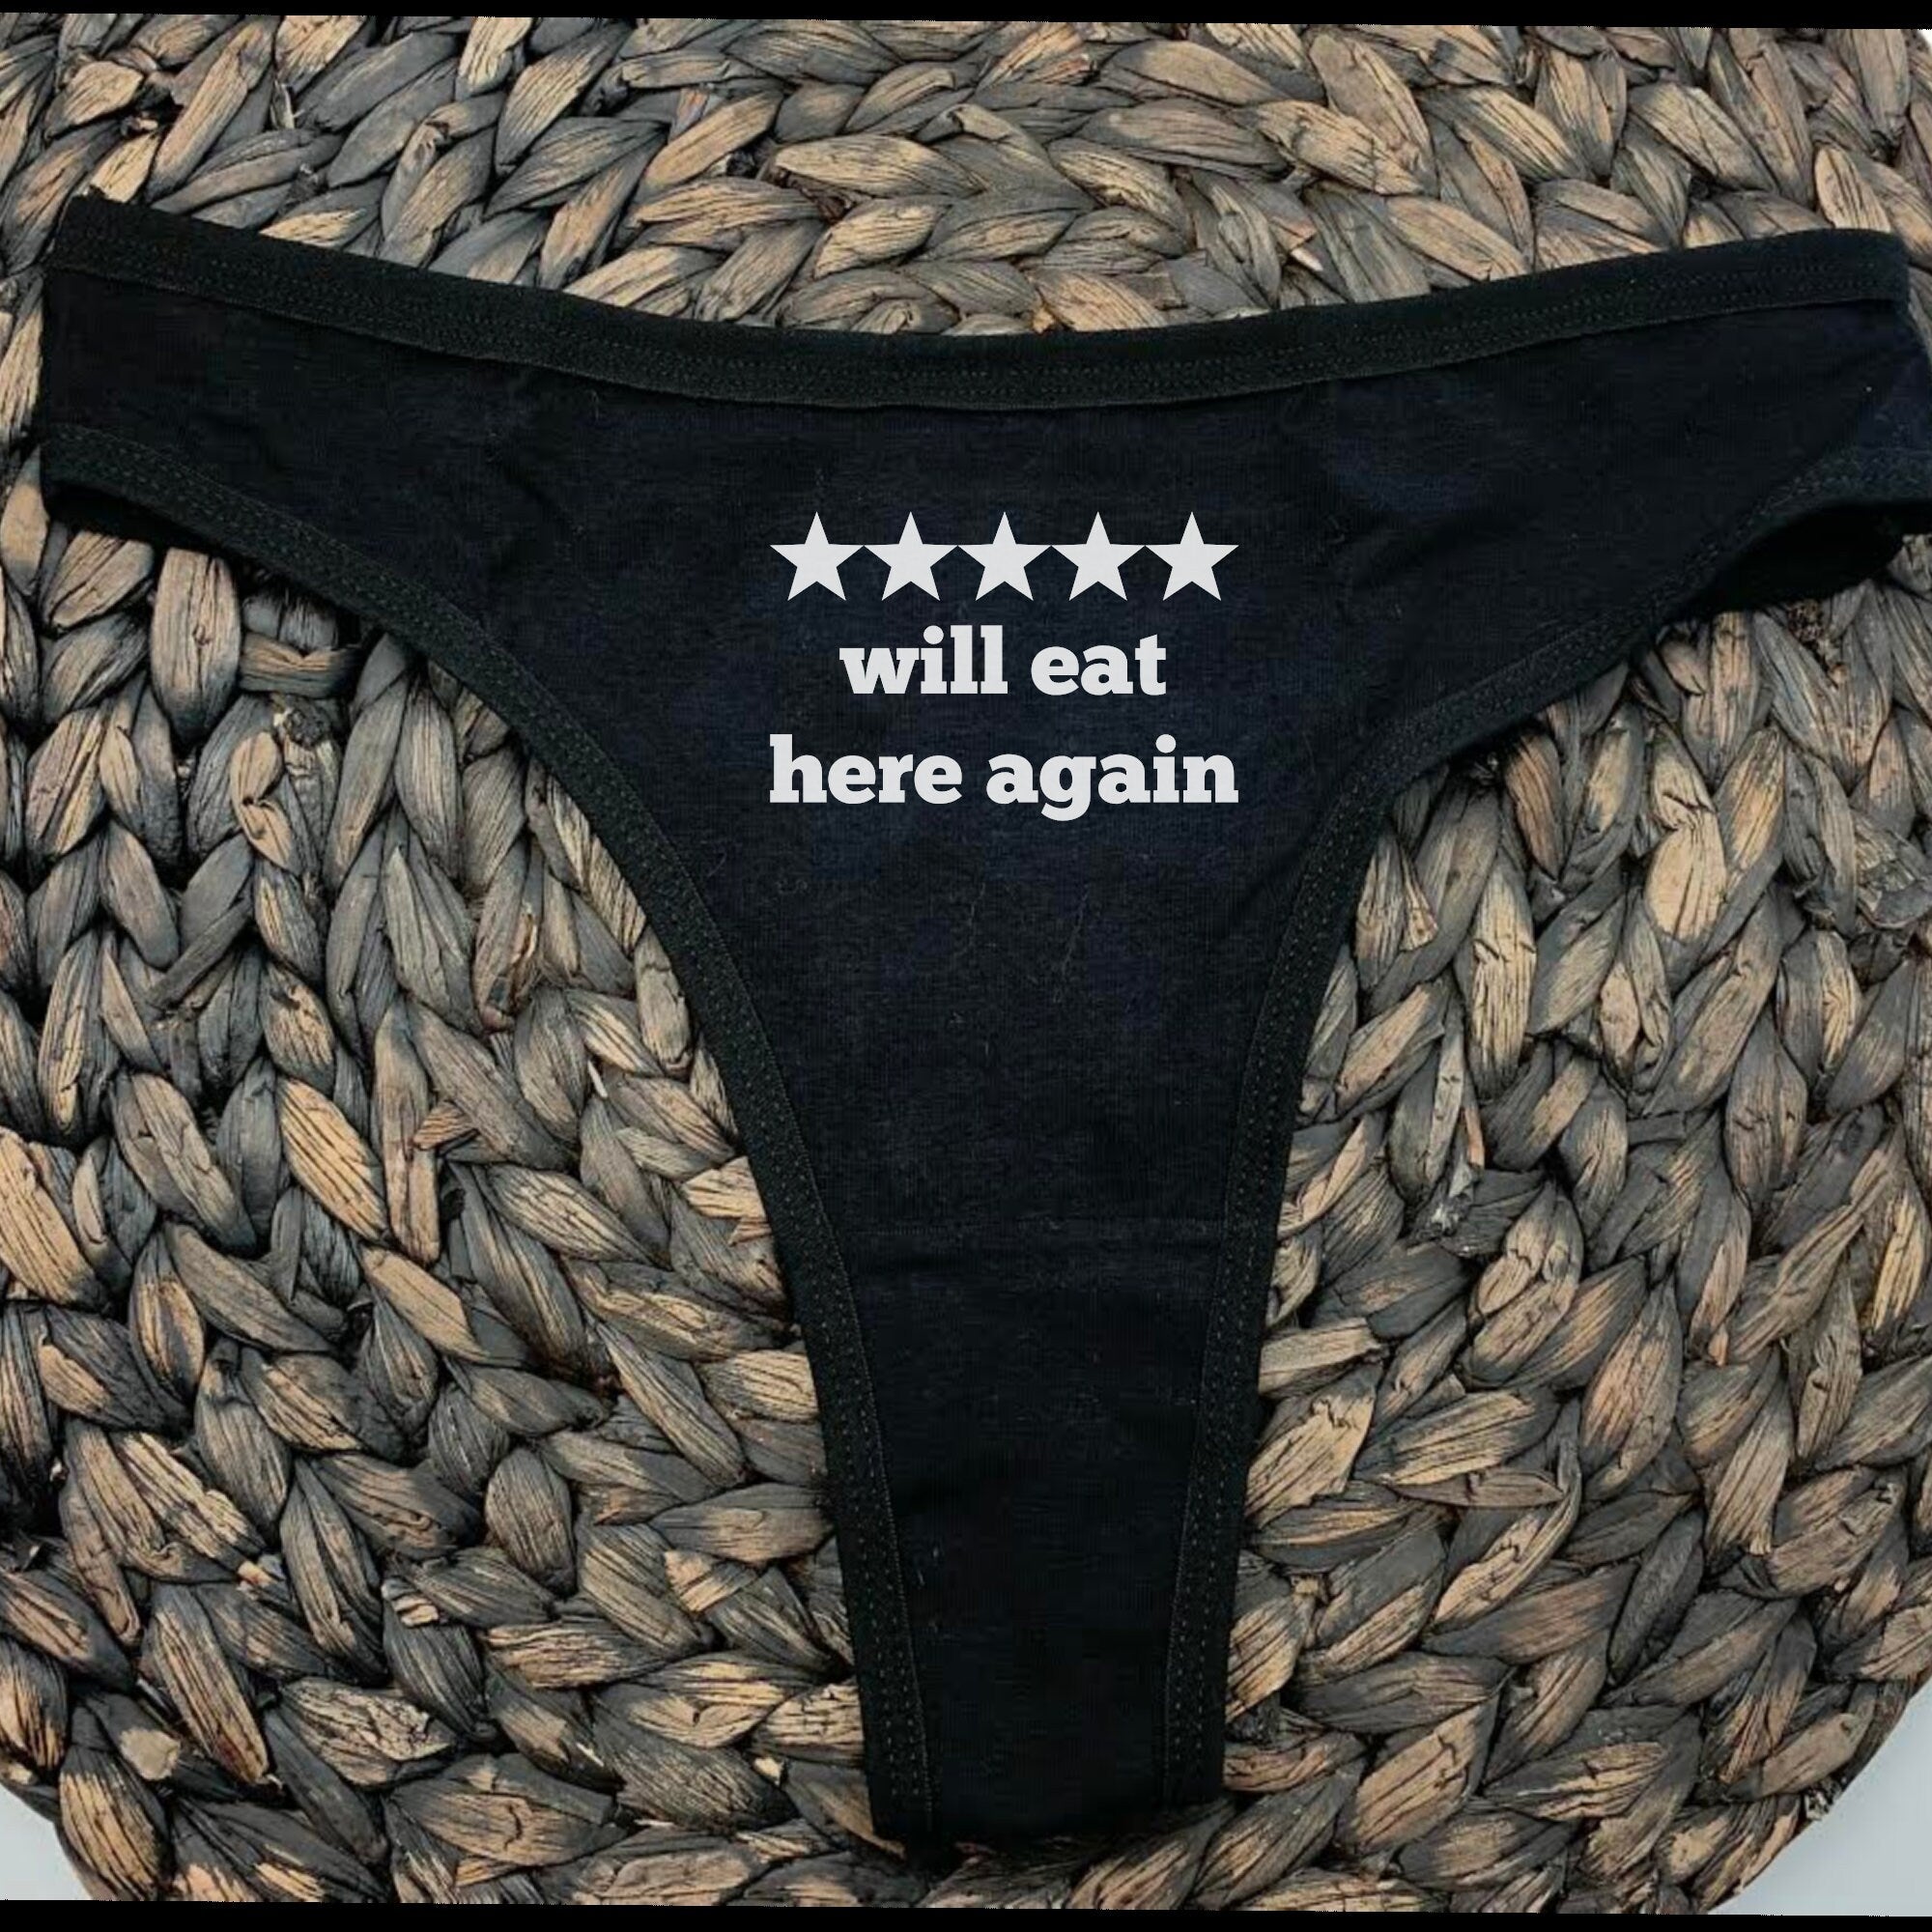 Five Stars - Gourmet Dining Thong: A Cheeky Culinary Statement